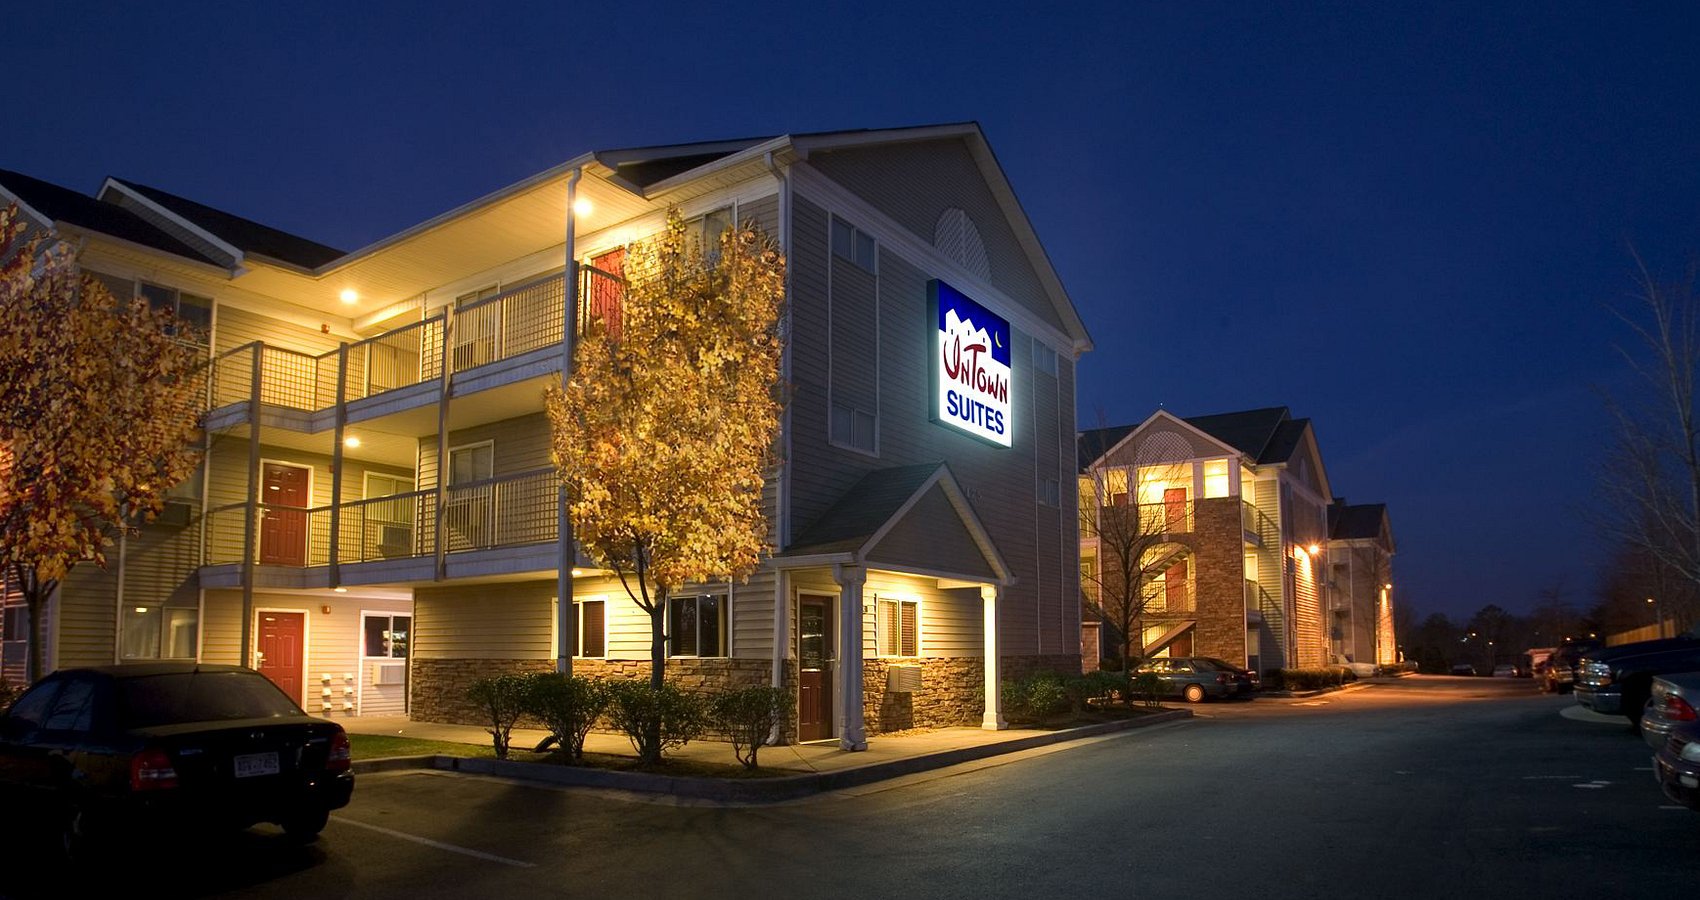 InTown Suites Extended Stay Louisville KY - Northeast image